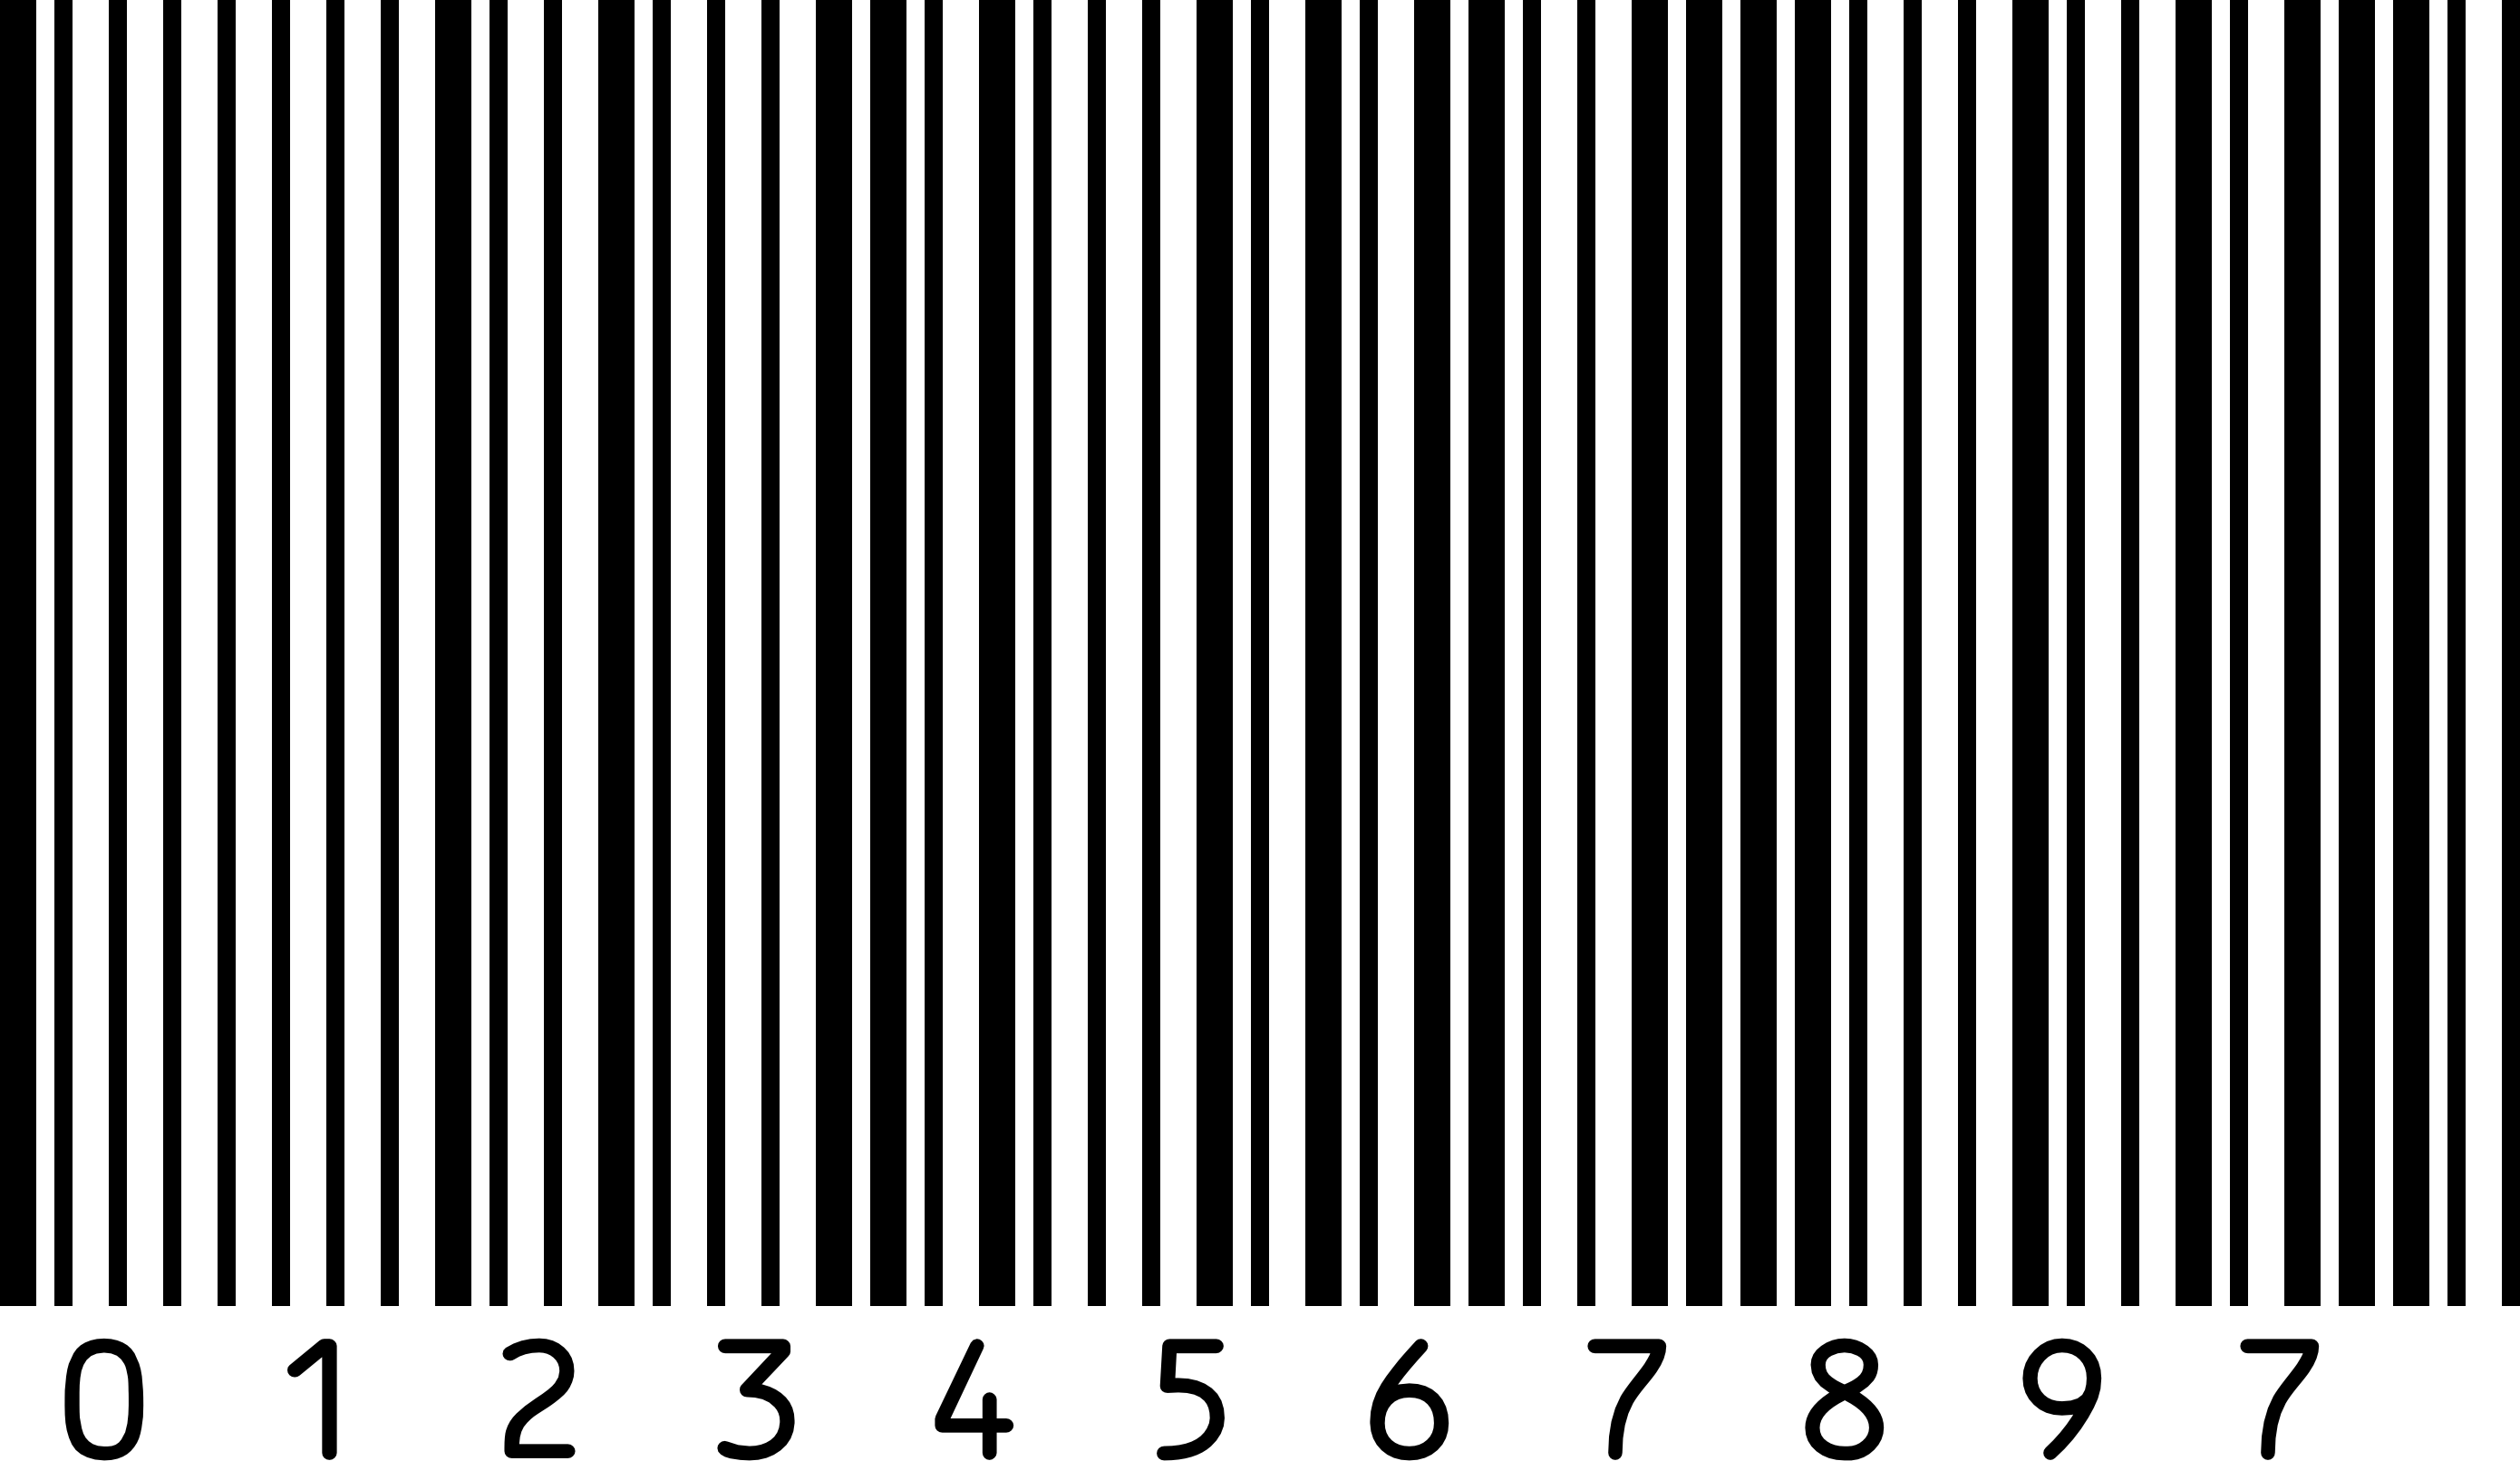 Example MSI Modified Plessey Barcode